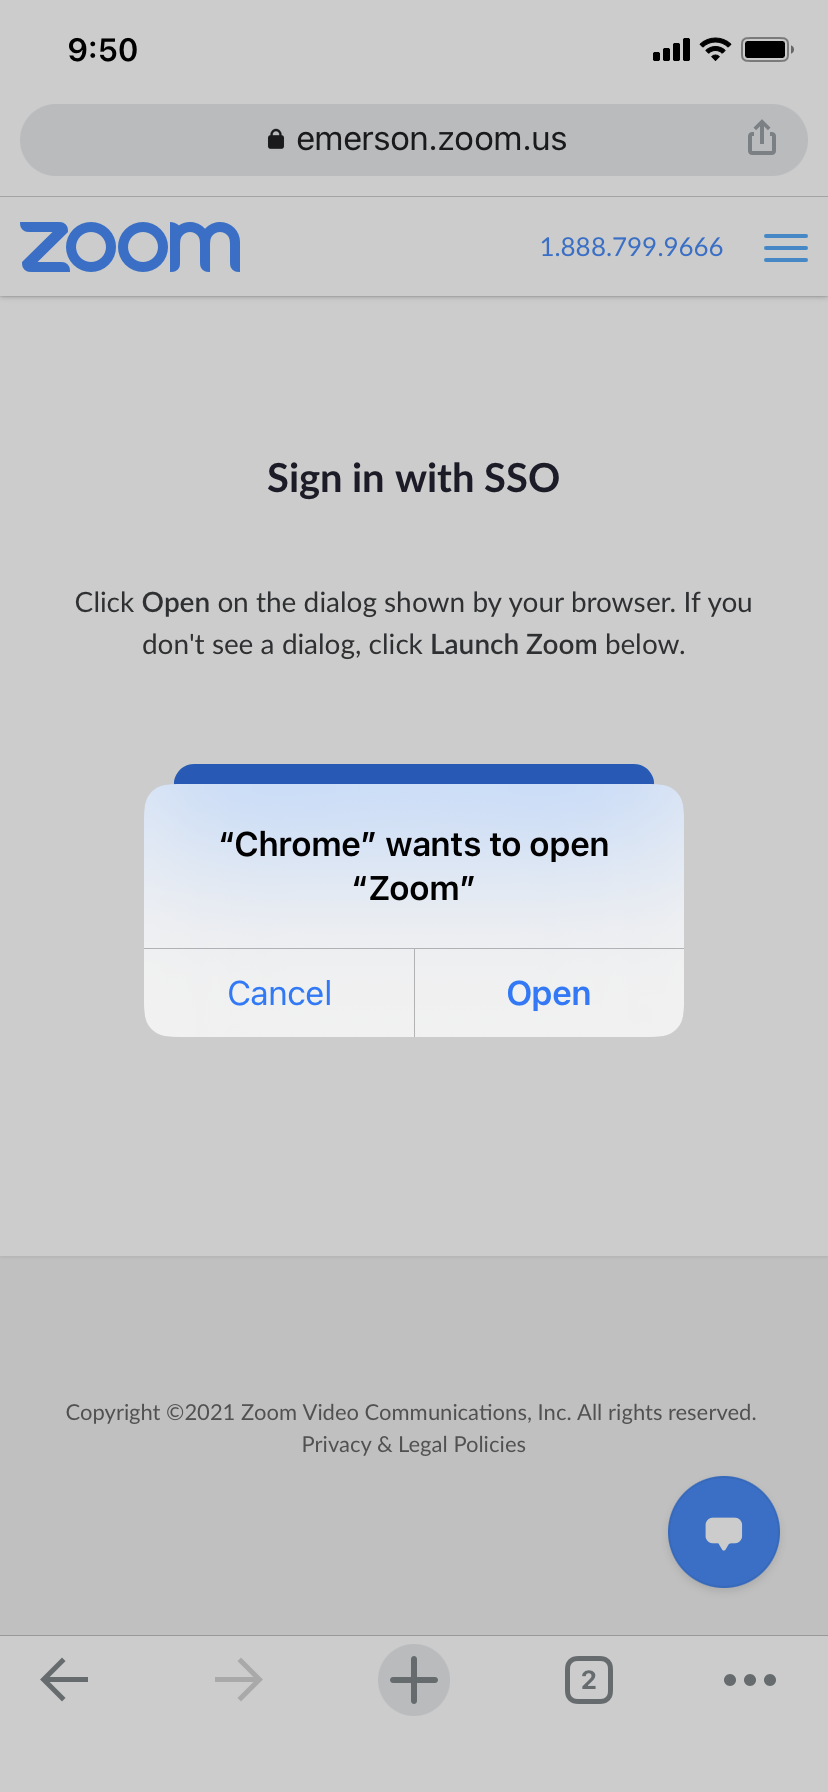 Image of web broswer window asking to open the Zoom app.